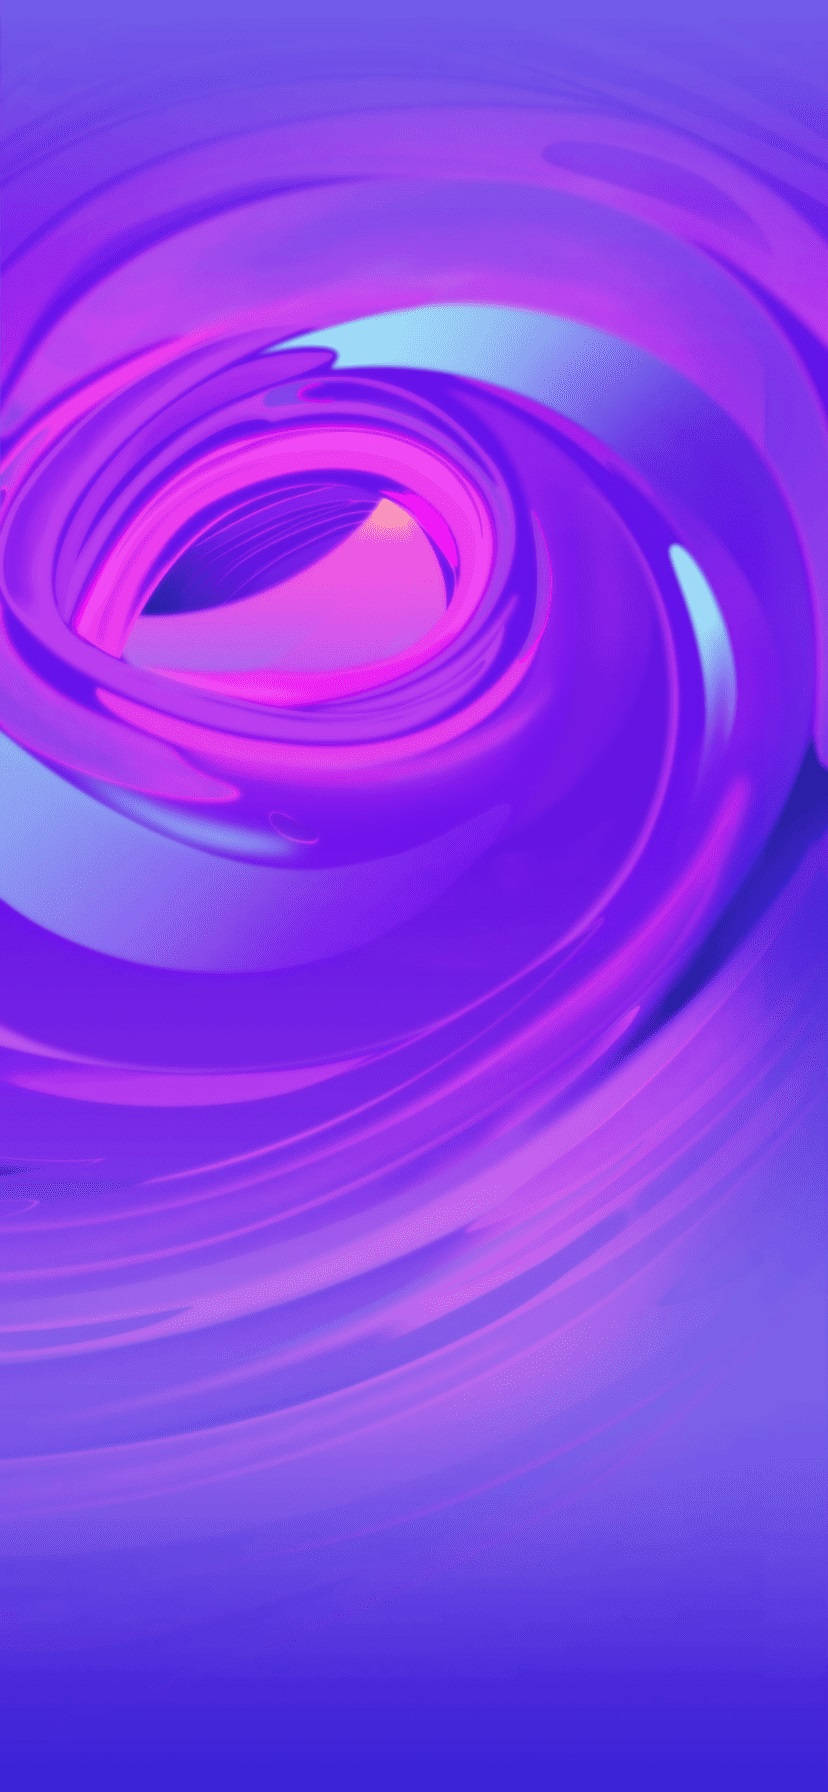 Aesthetic Purple Swirl For Iphone Background